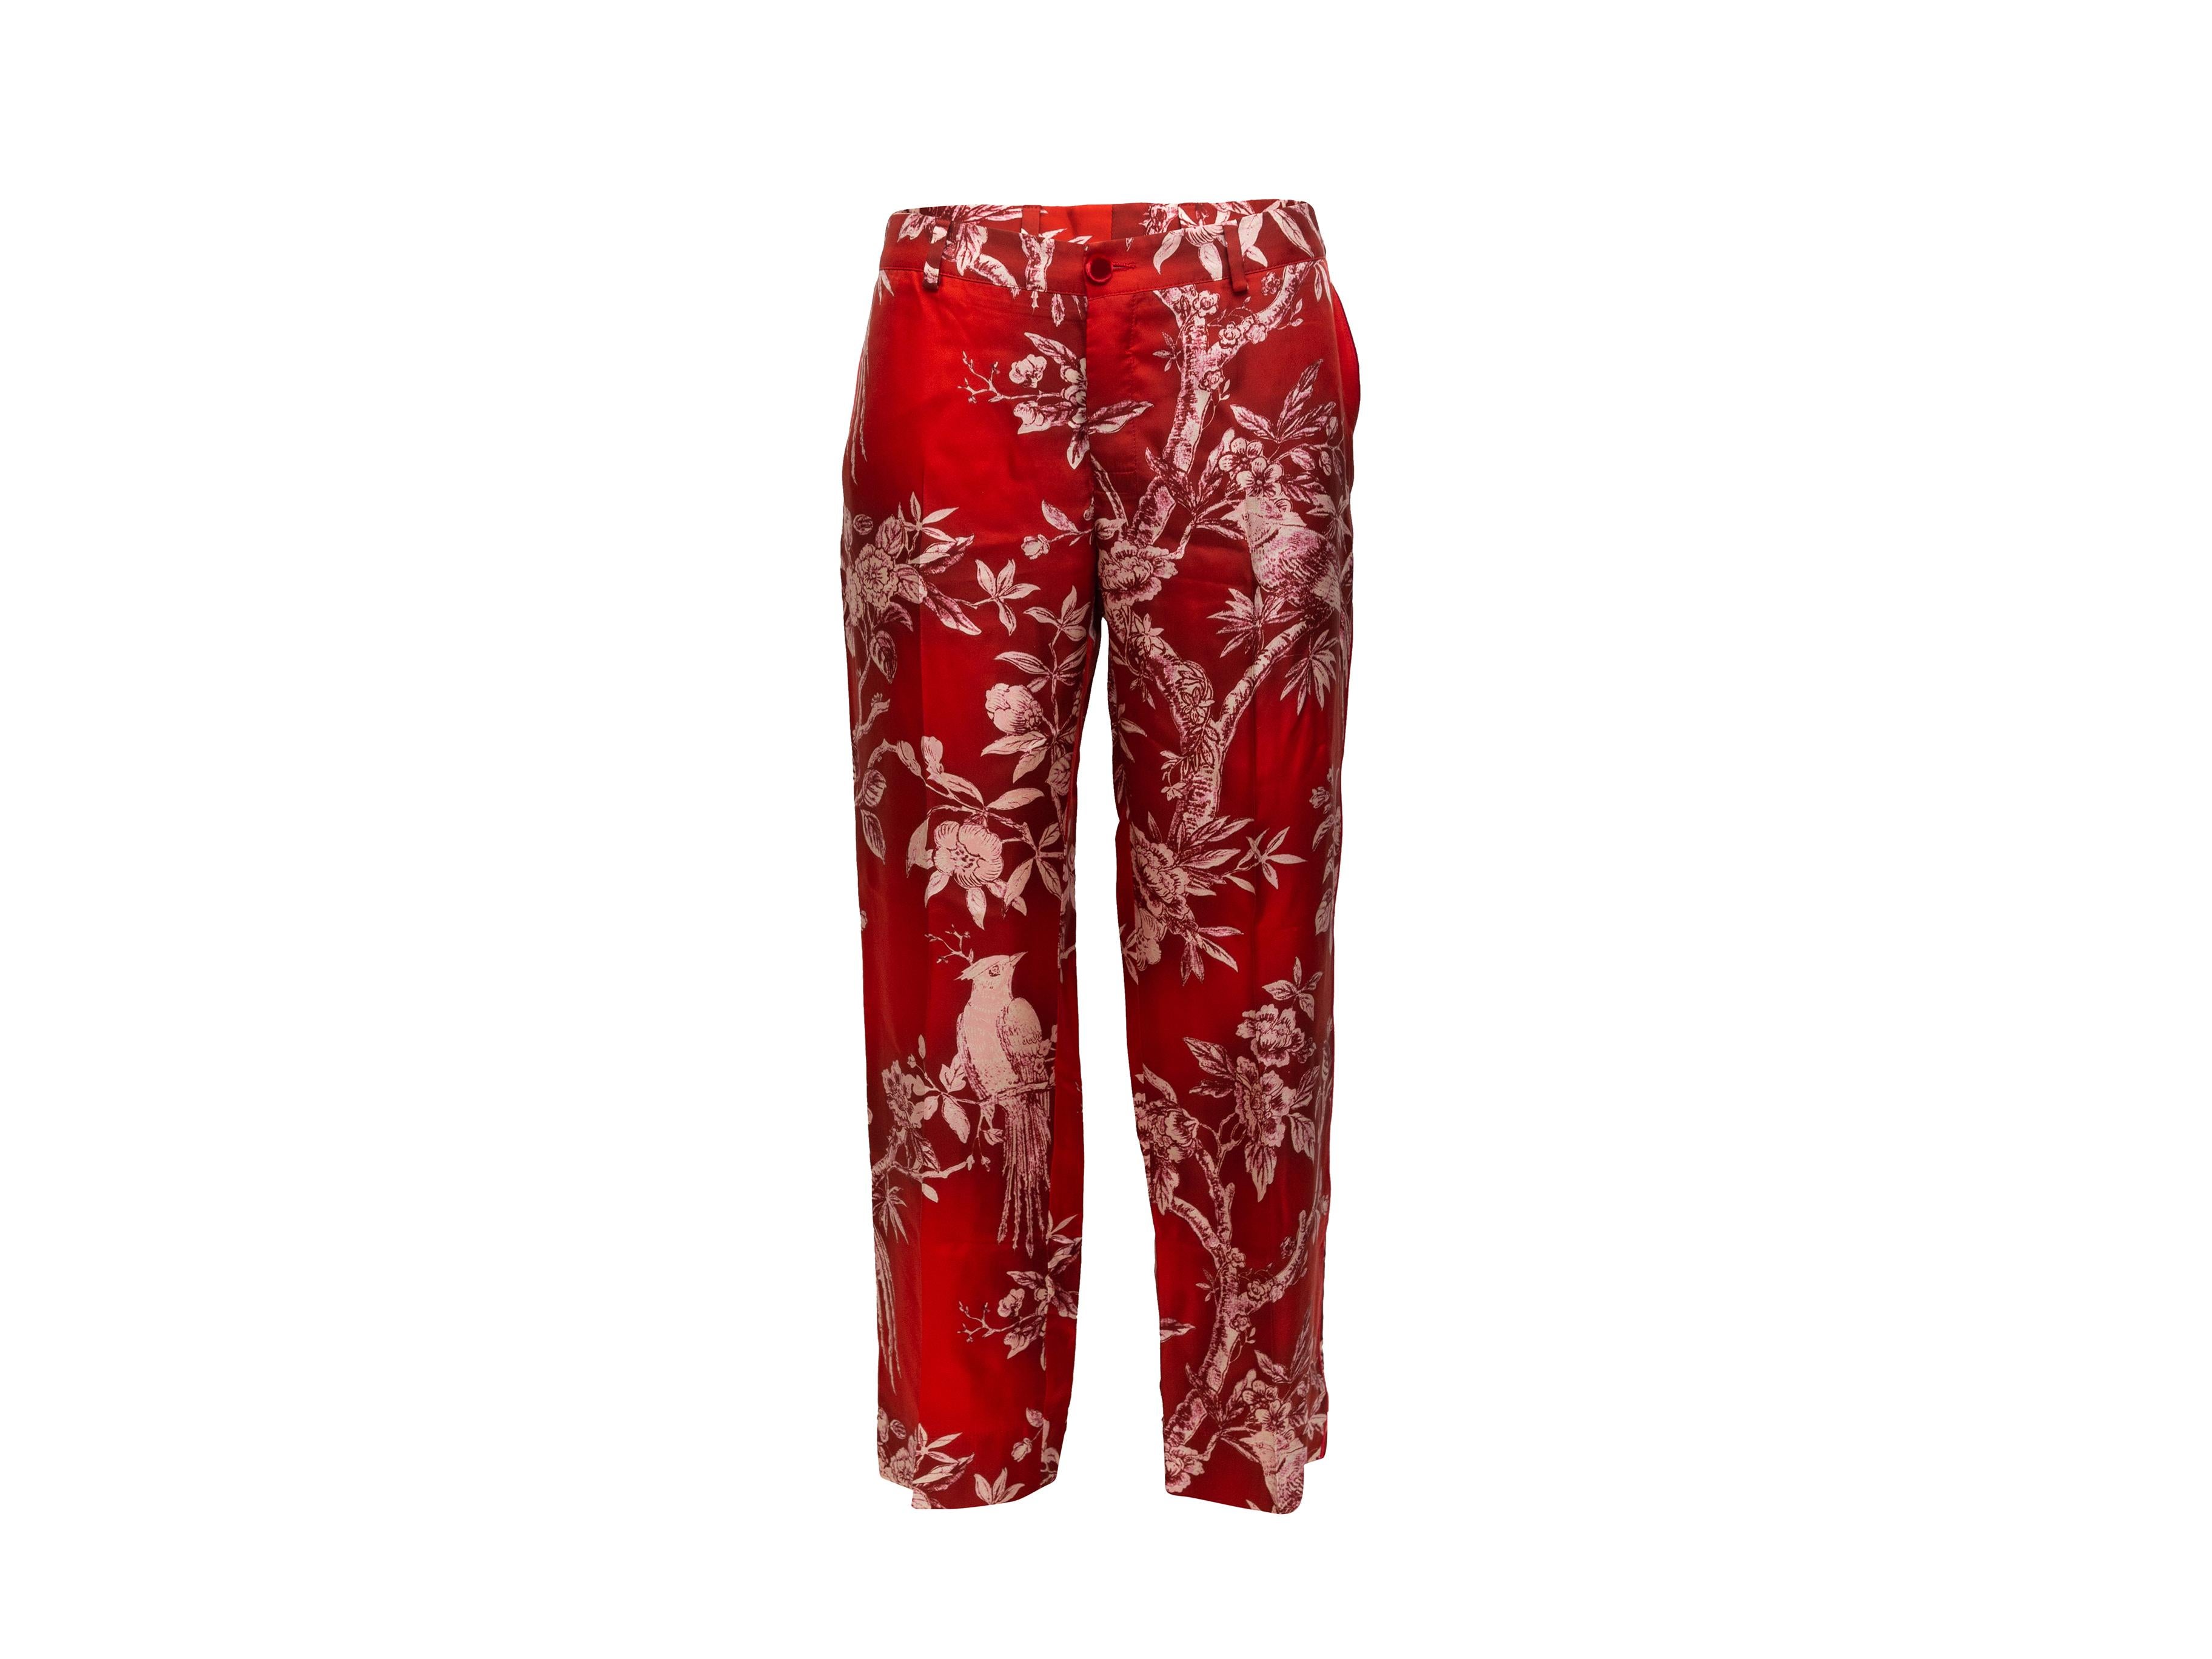 Product details: Red and white silk bird print pants by F.R.S. For Restless Sleepers. Dual back pockets. Button closure at front. 32